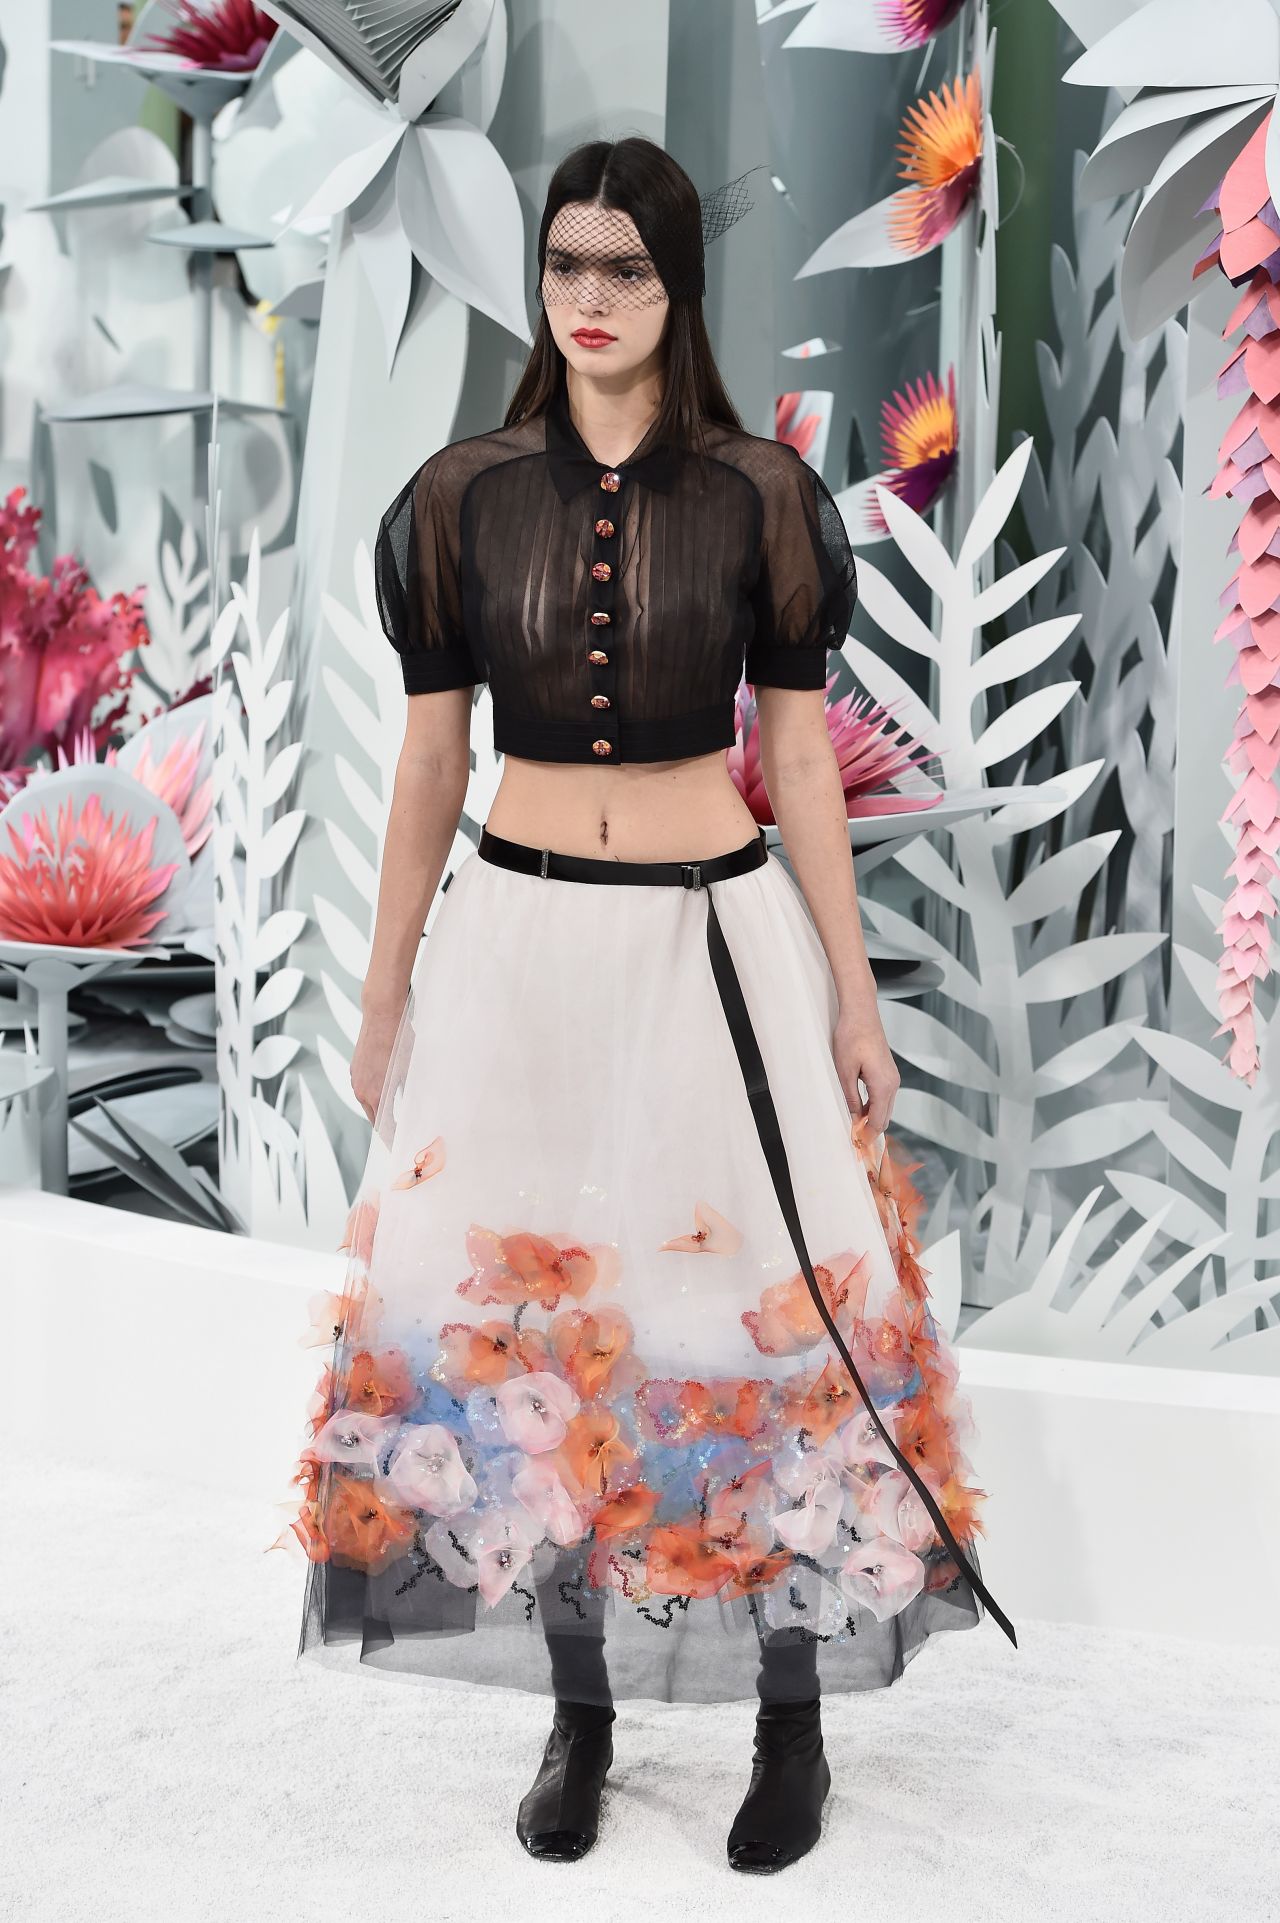 kendall-jenner-chanel-spring-summer-2015-fashion-show-in-paris_